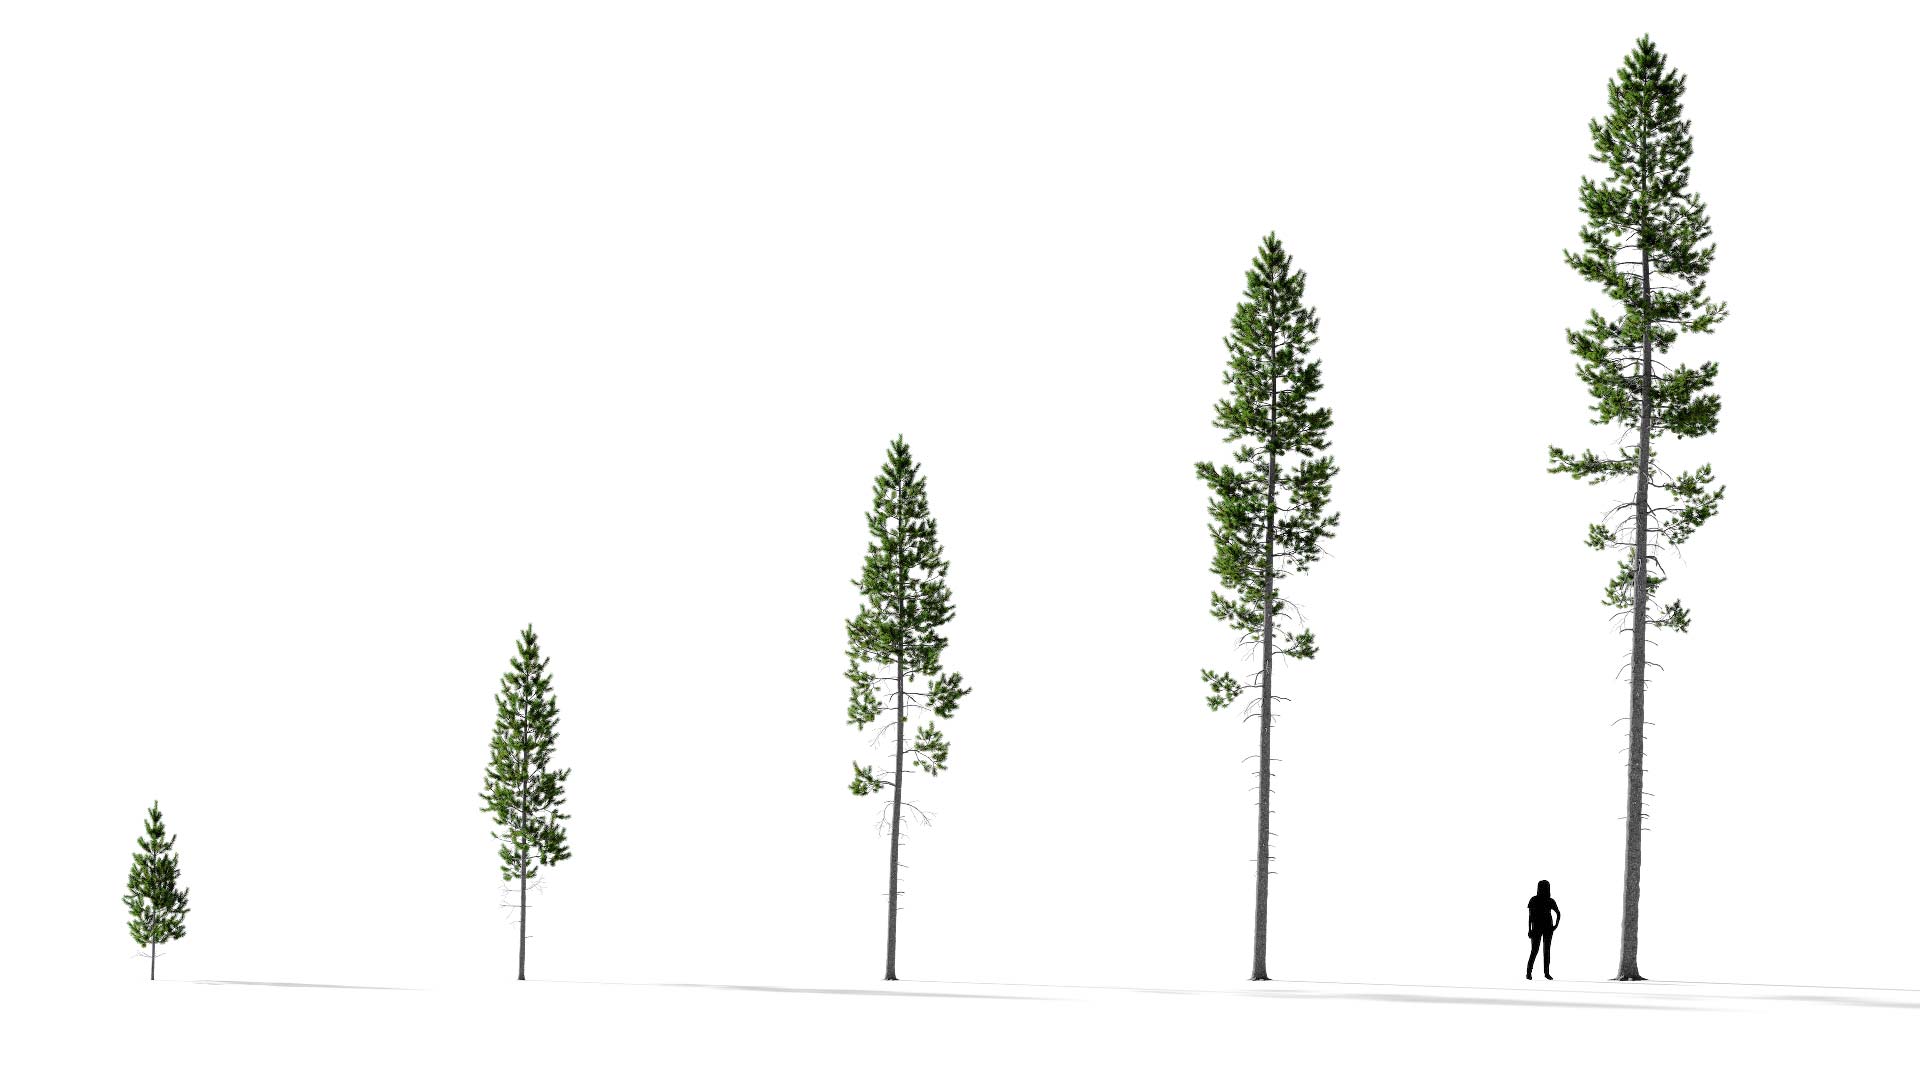 3D model of the Rocky Mountain lodgepole pine forest Pinus contorta var latifolia forest maturity variations